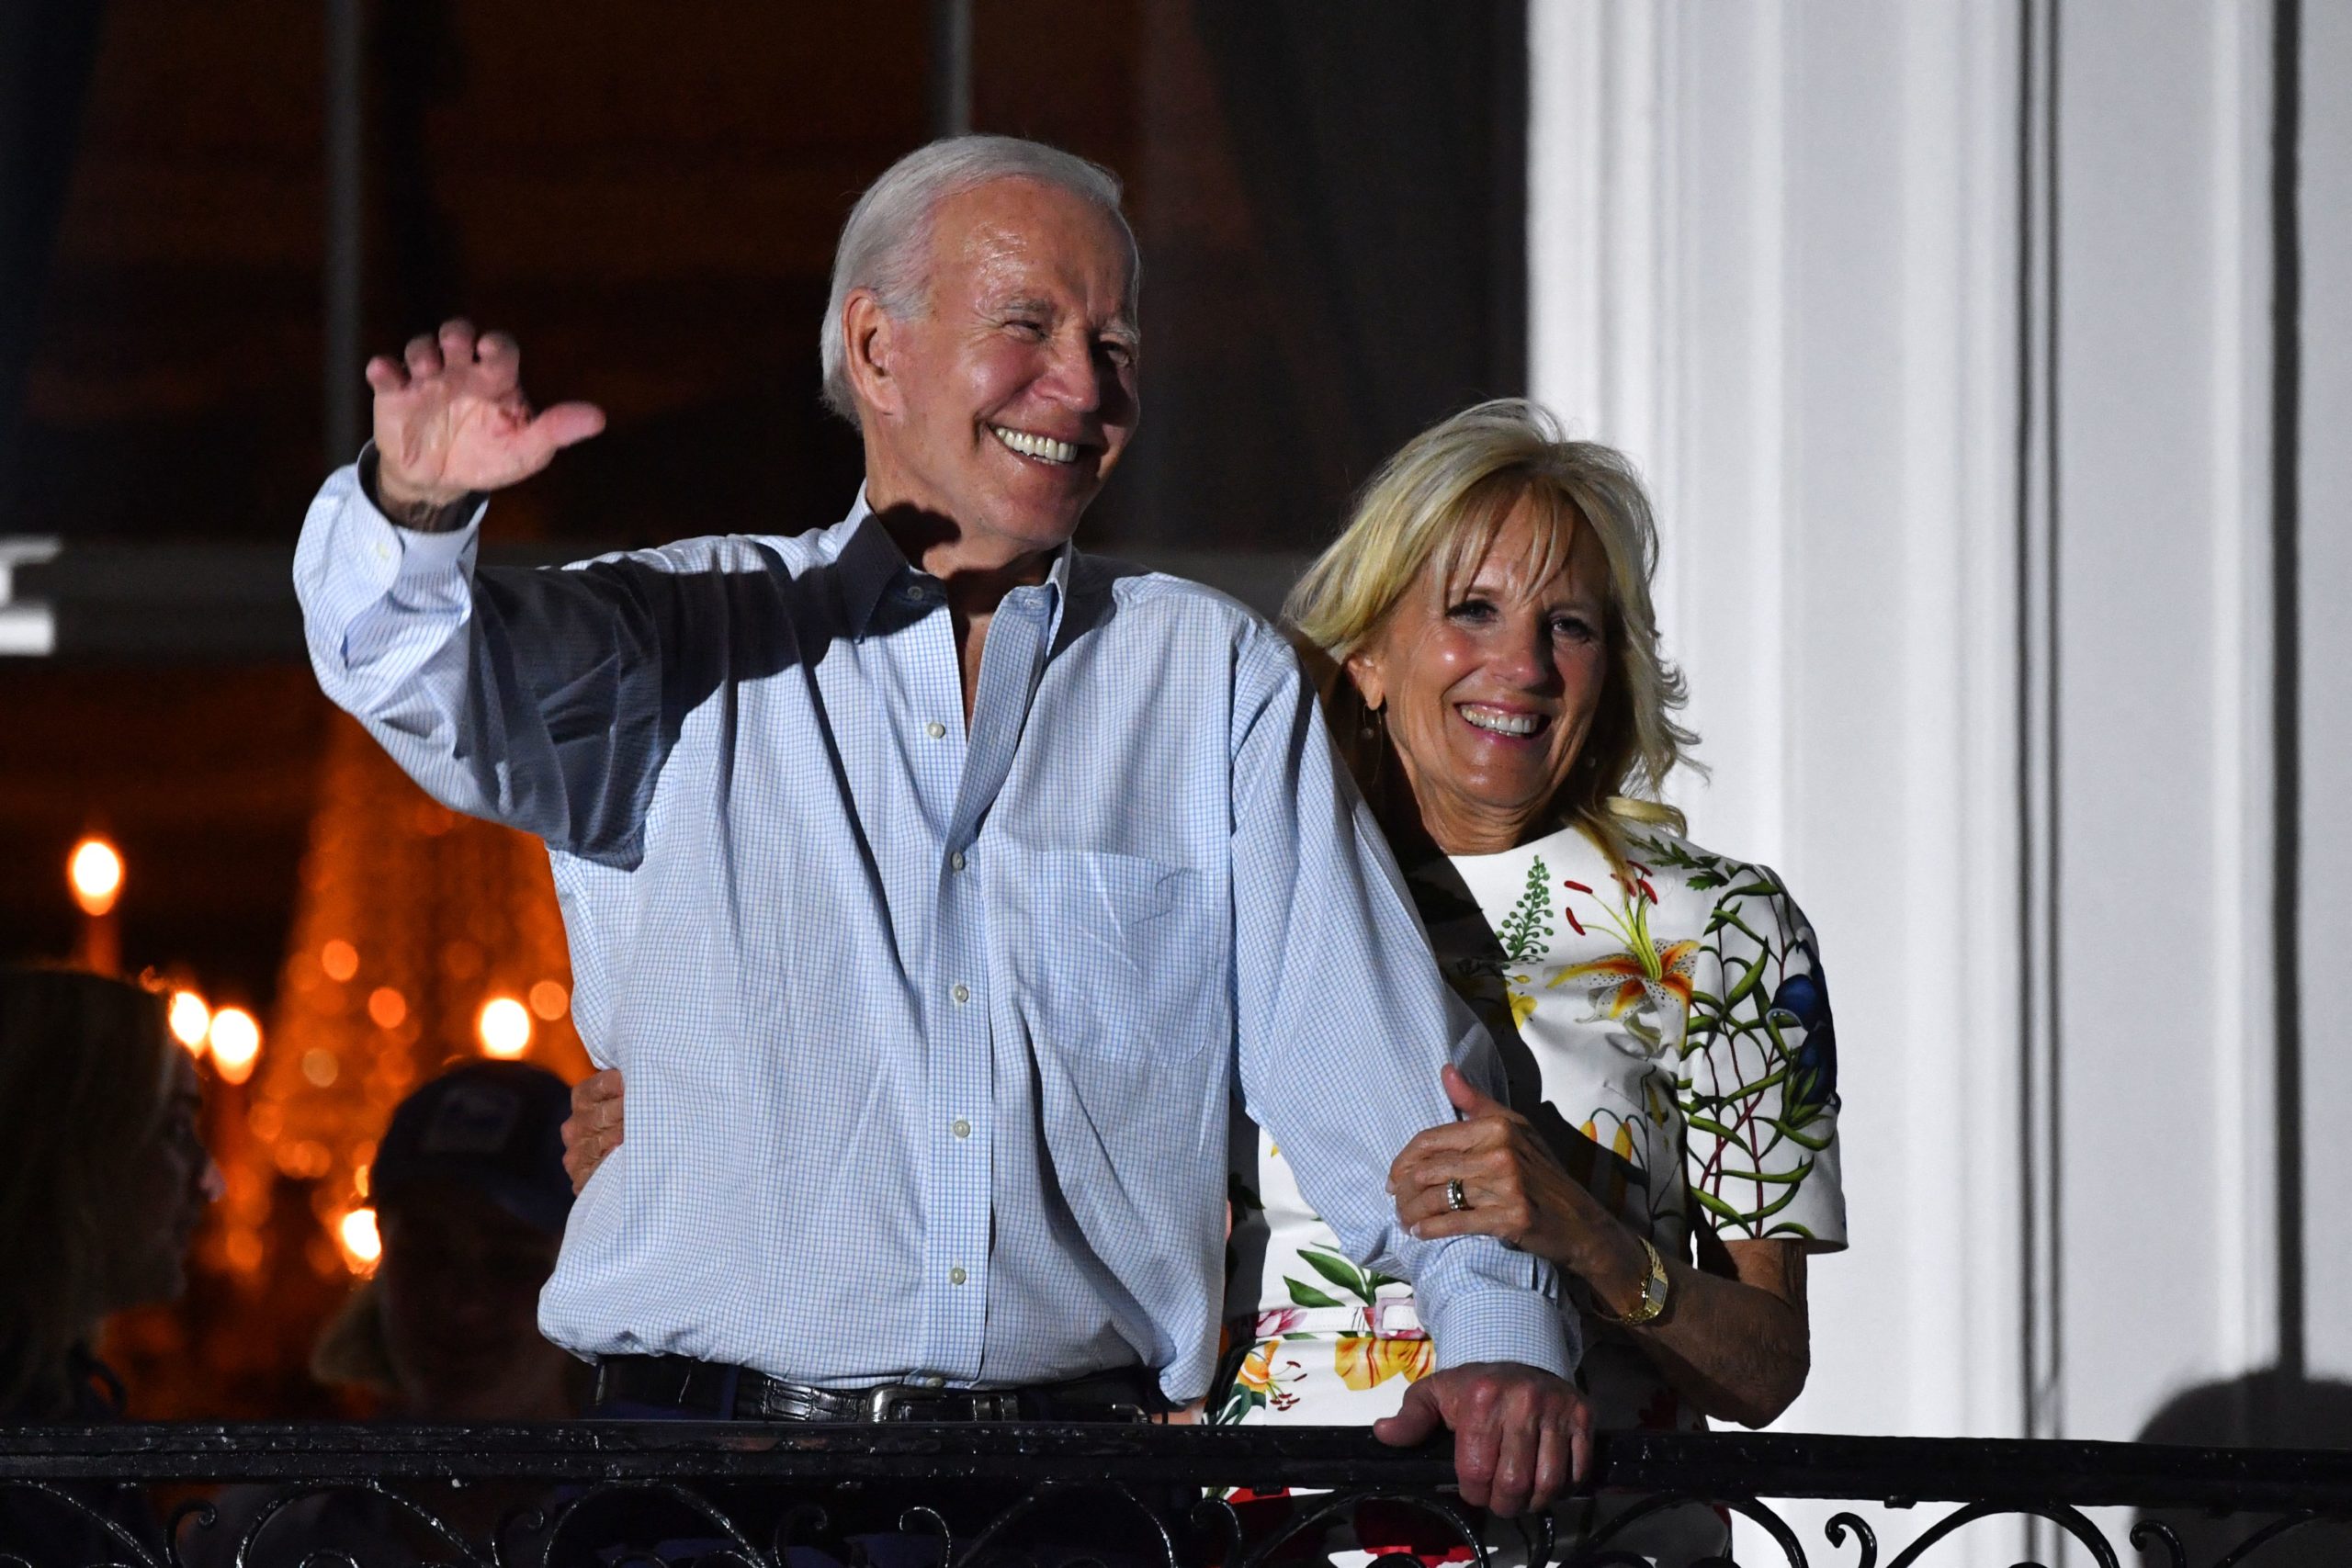 US President Joe Biden (L) and US First Lady Jill Biden wave from a balcony of the White House during 4th of July fireworks in Washington, DC, July 4, 2022. (Photo by Nicholas Kamm / AFP) (Photo by NICHOLAS KAMM/AFP via Getty Images)